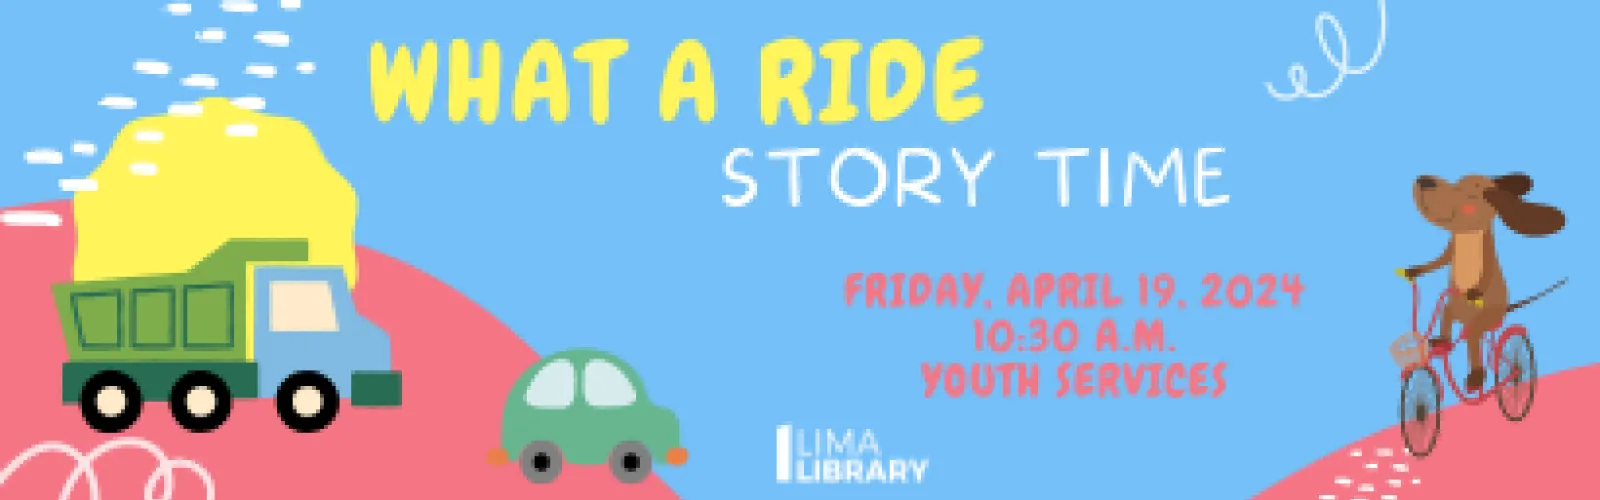 Story Time: What a Ride Flyer Image